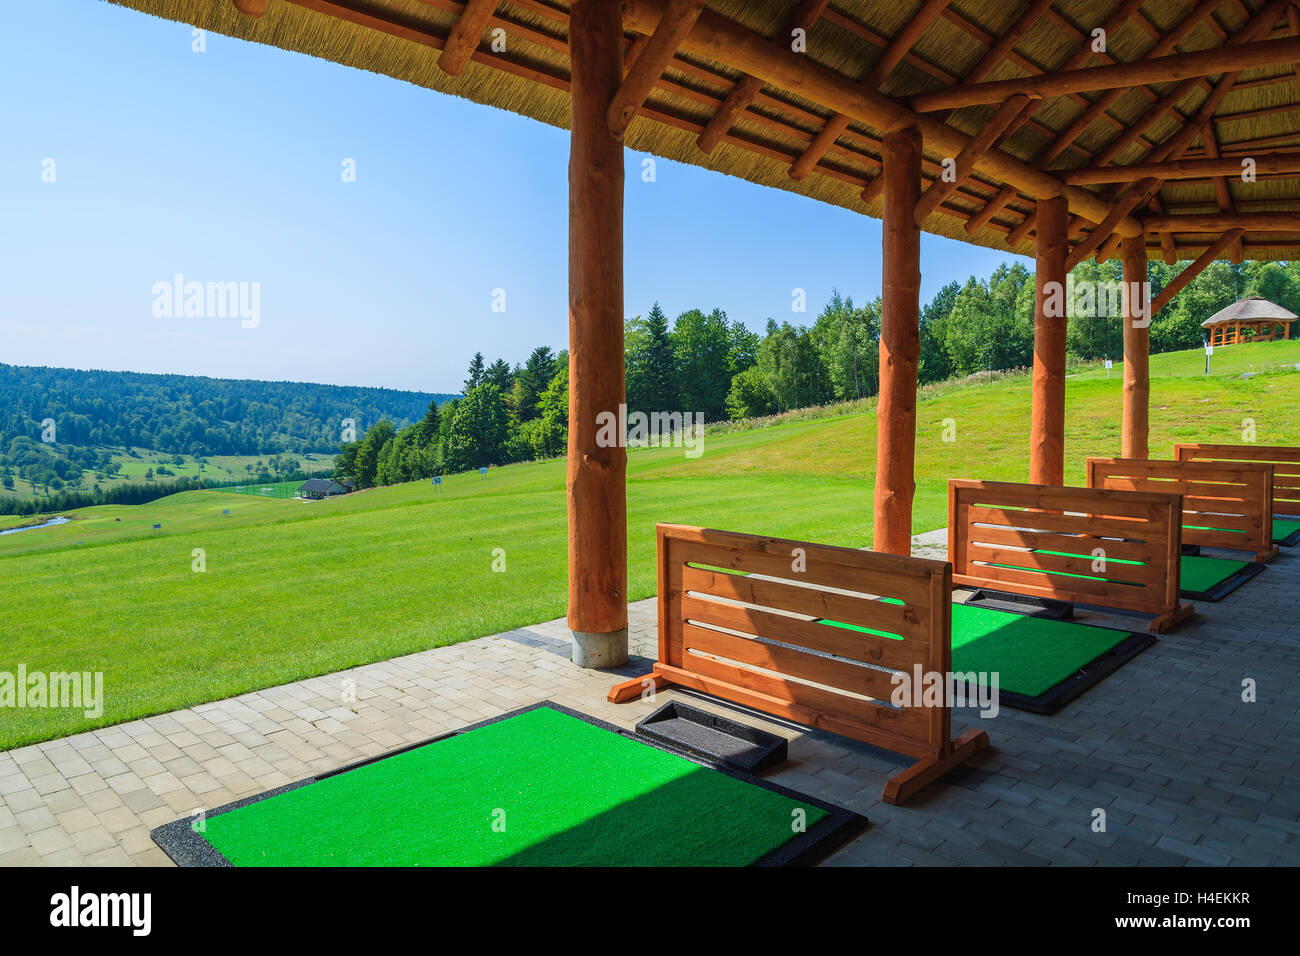 ARLAMOW GOLF COURSE, POLAND - AUG 3, 2014: beautiful golf play area on sunny summer day in Arlamow Hotel. This luxury hotel was owned by Poland's government and is located in Bieszczady Mountains. Stock Photo